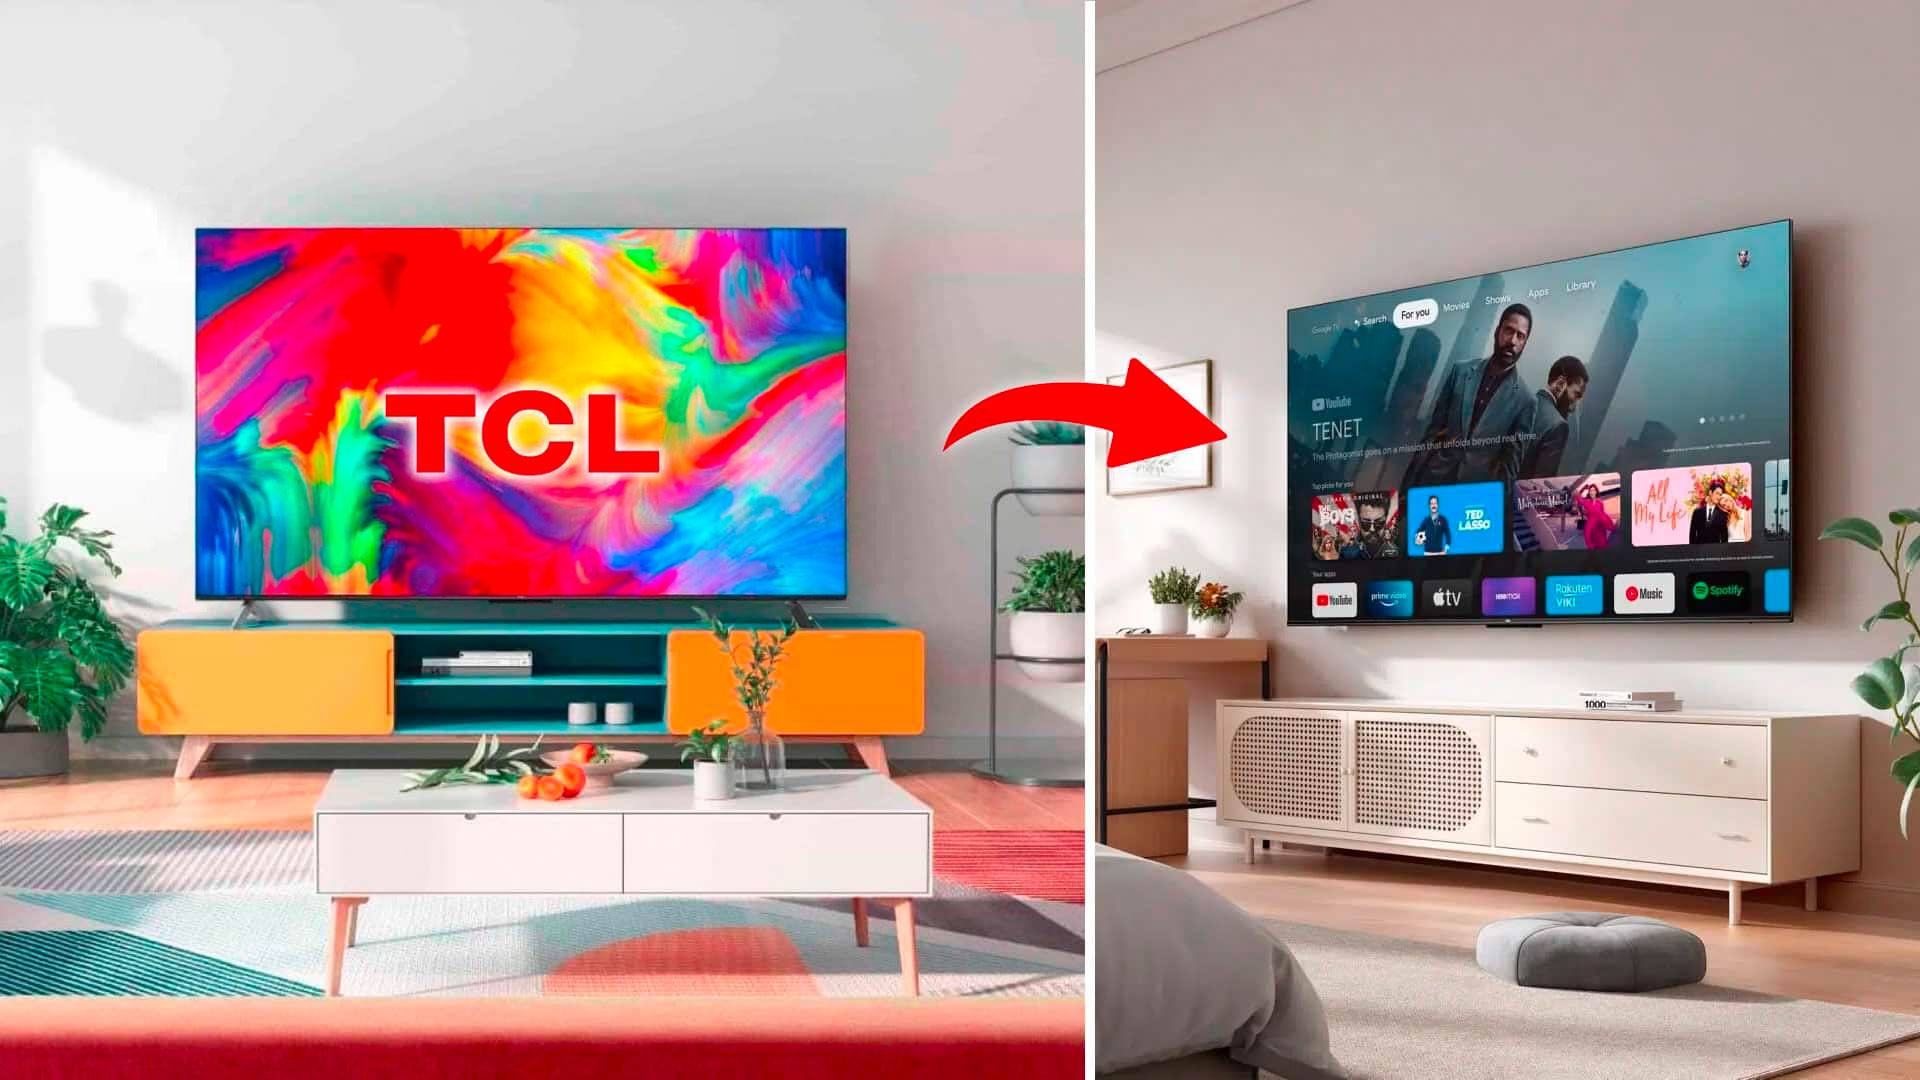 TCL 58"